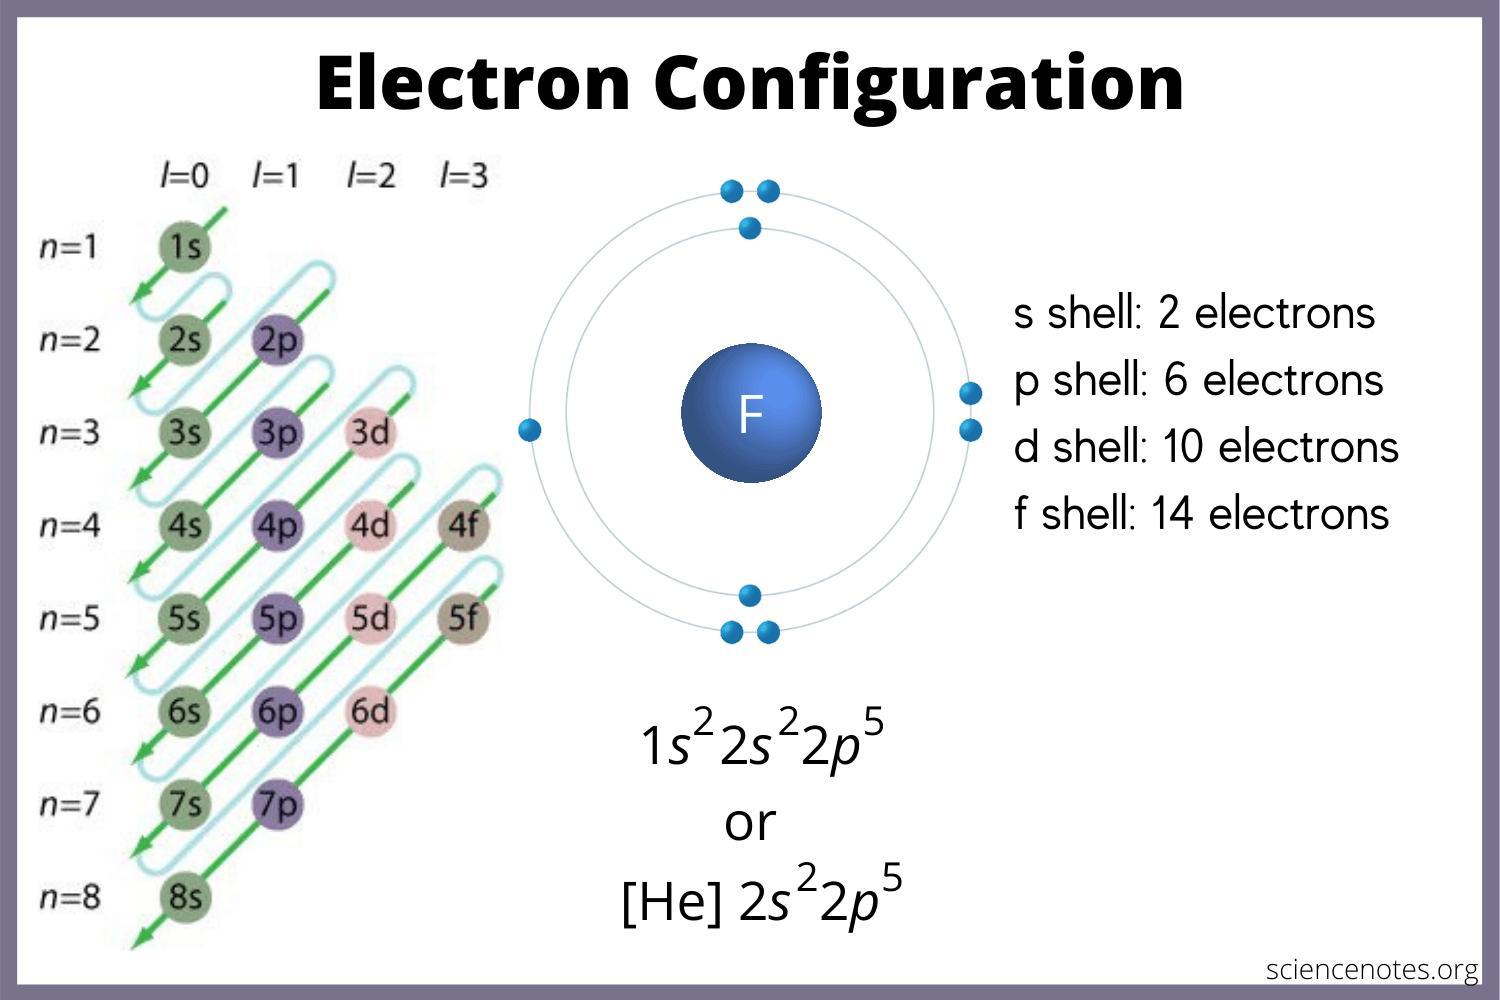 The Electron Configuration For An Atom Is 1 S 2 2 S 2 2 P 2. How Many Electrons Does The Atom Have?.